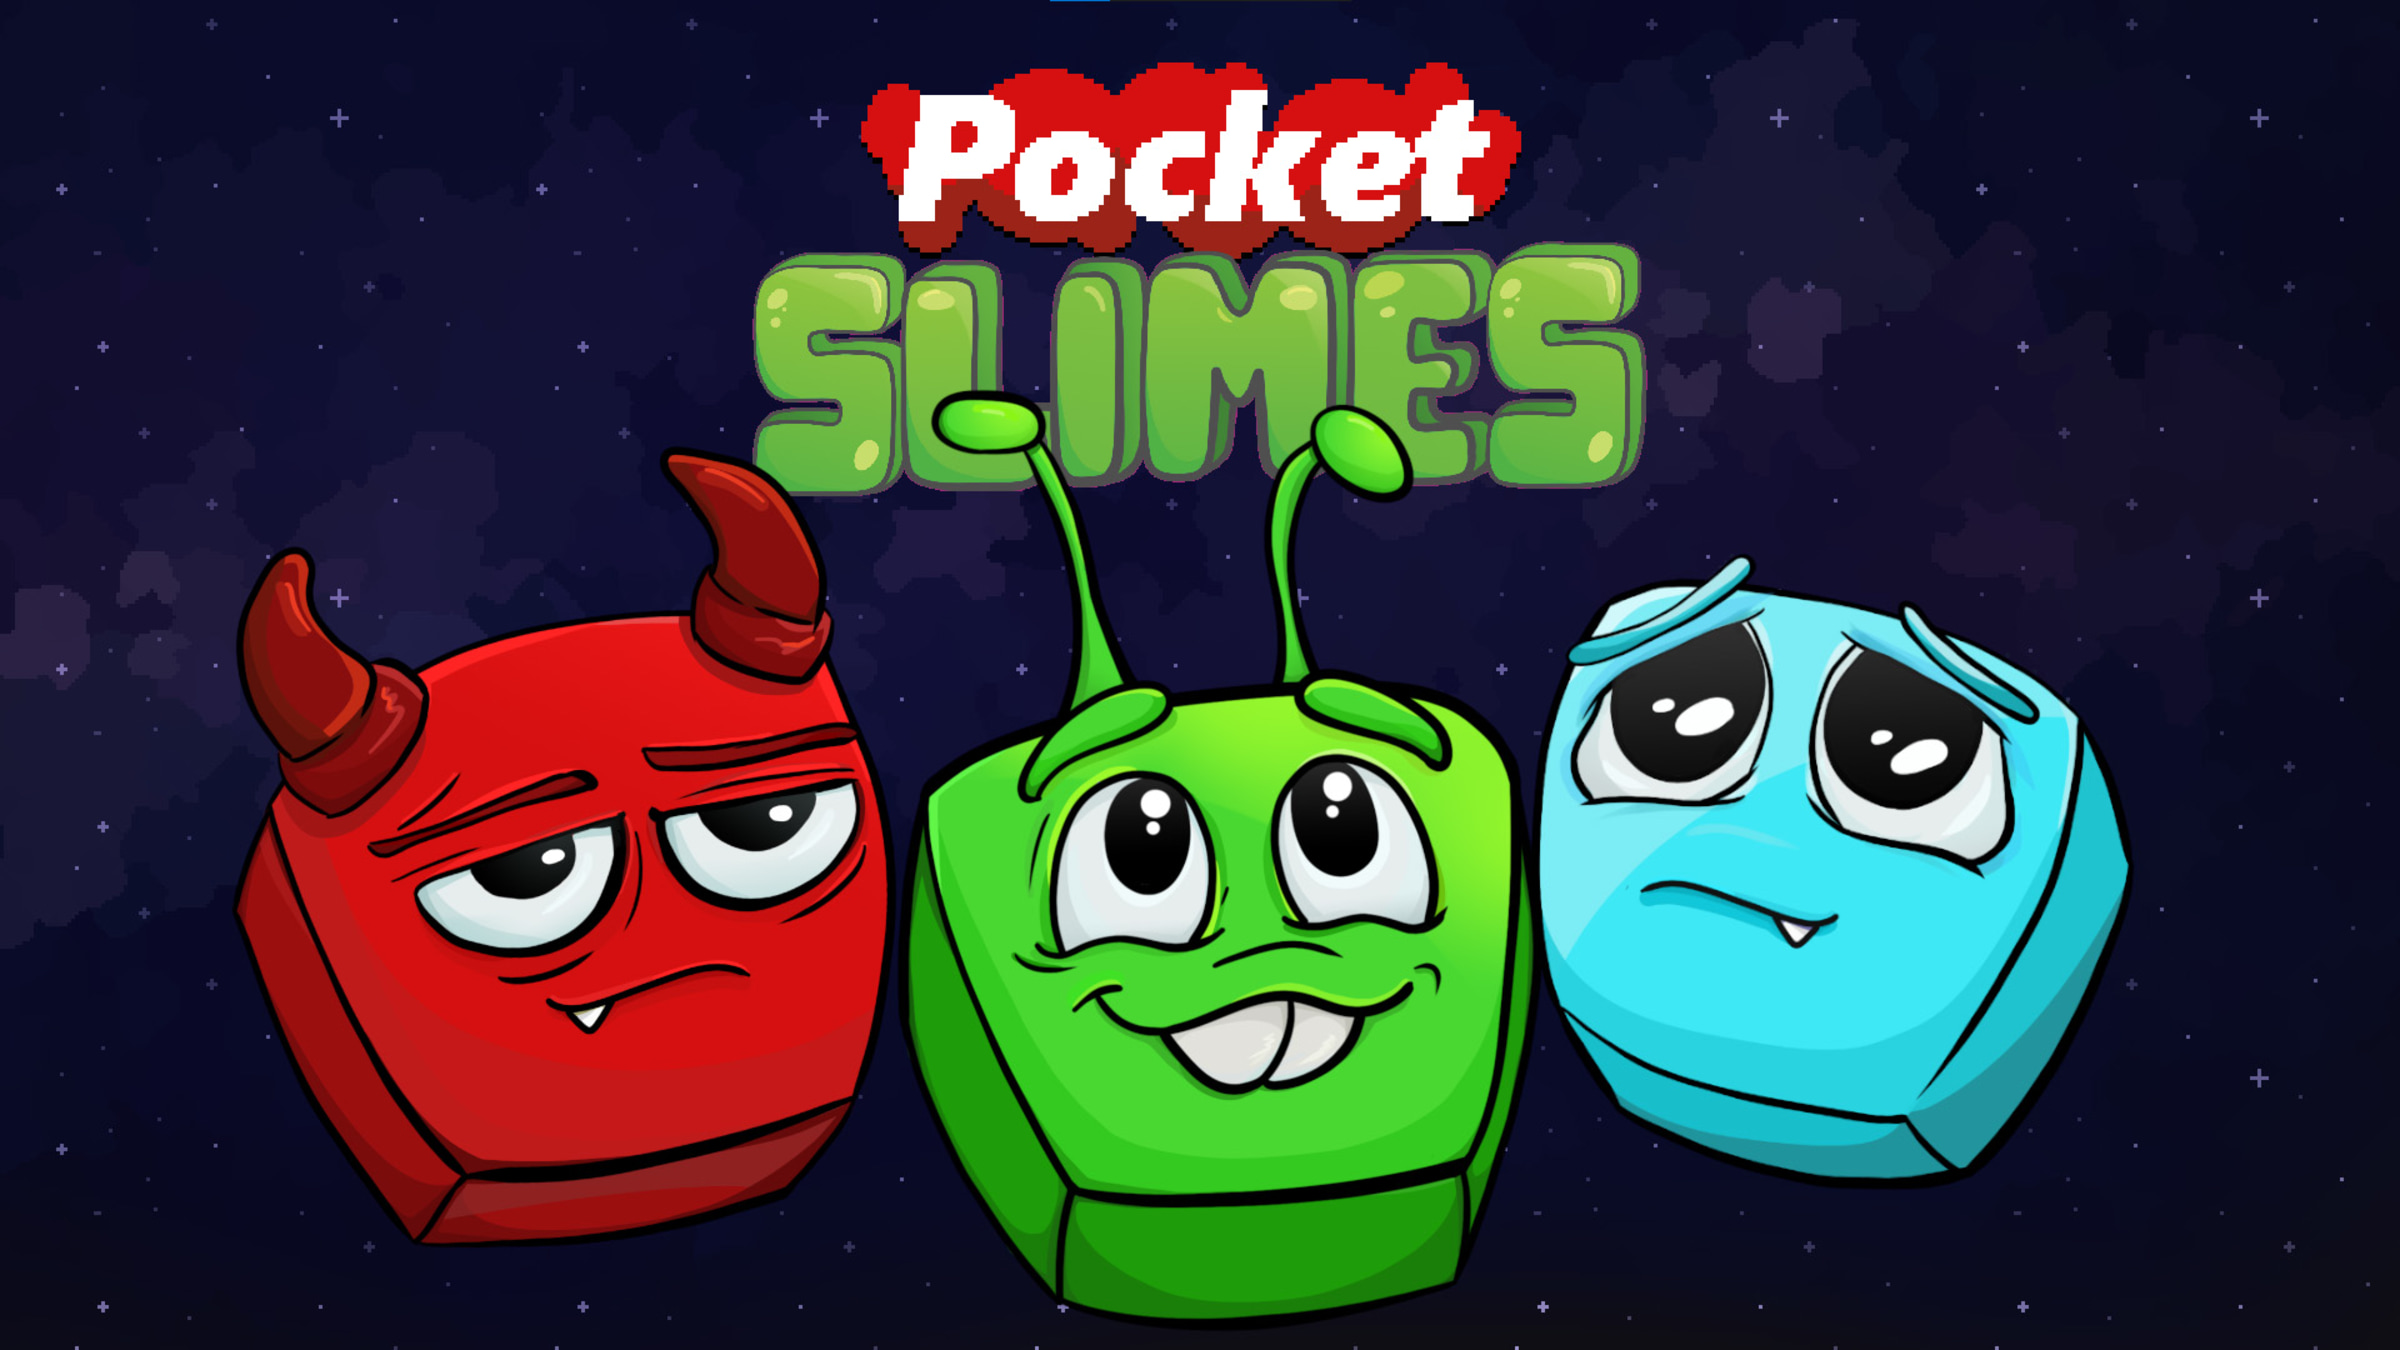 Pocket Slimes for Nintendo Switch - Nintendo Official Site